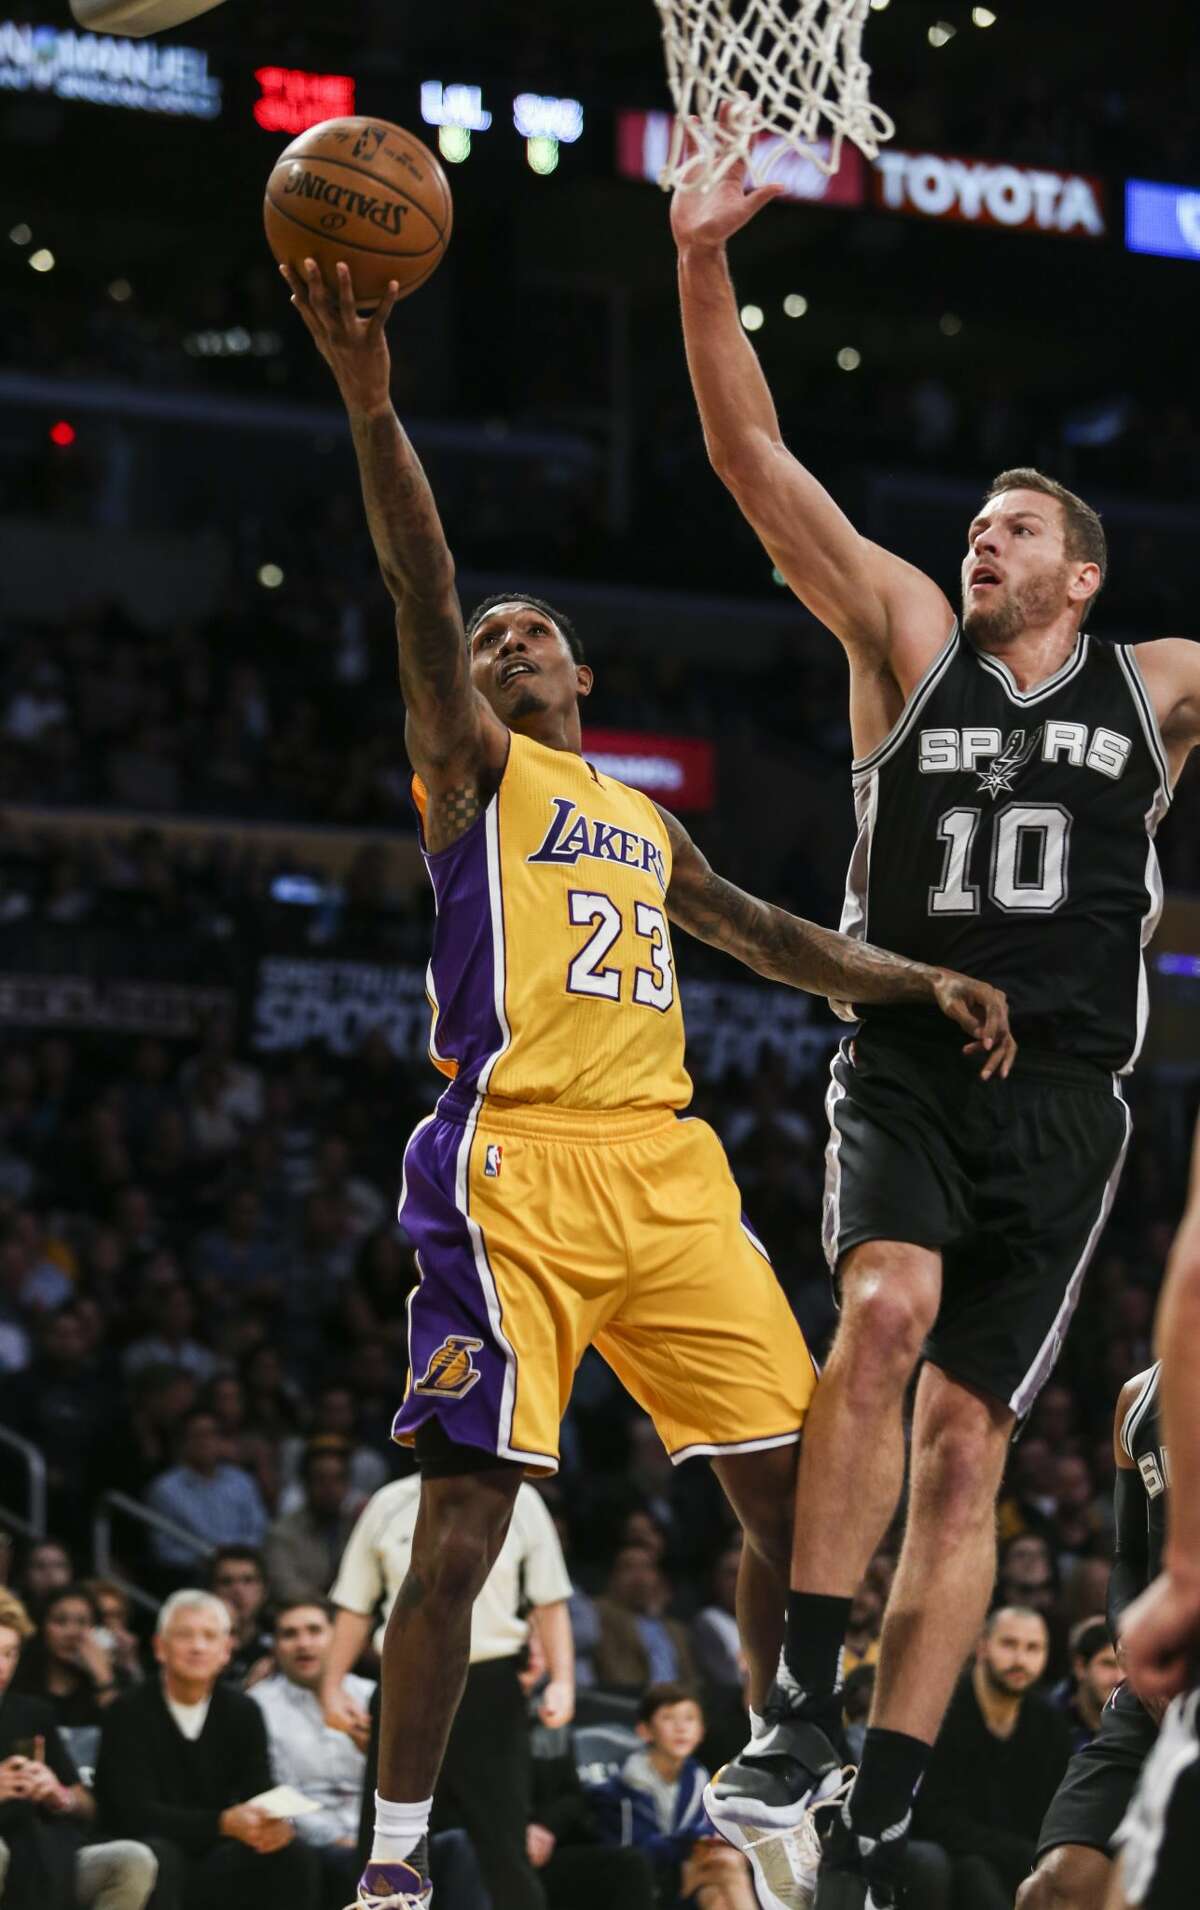 Los Angeles Lakers guard Lou Williams goes up for a layup while defended by San Antonio Spurs forward David Lee during the first half of an NBA basketball game Friday, November 18, 2016, in Los Angeles. (AP Photo/Ringo H.W. Chiu)